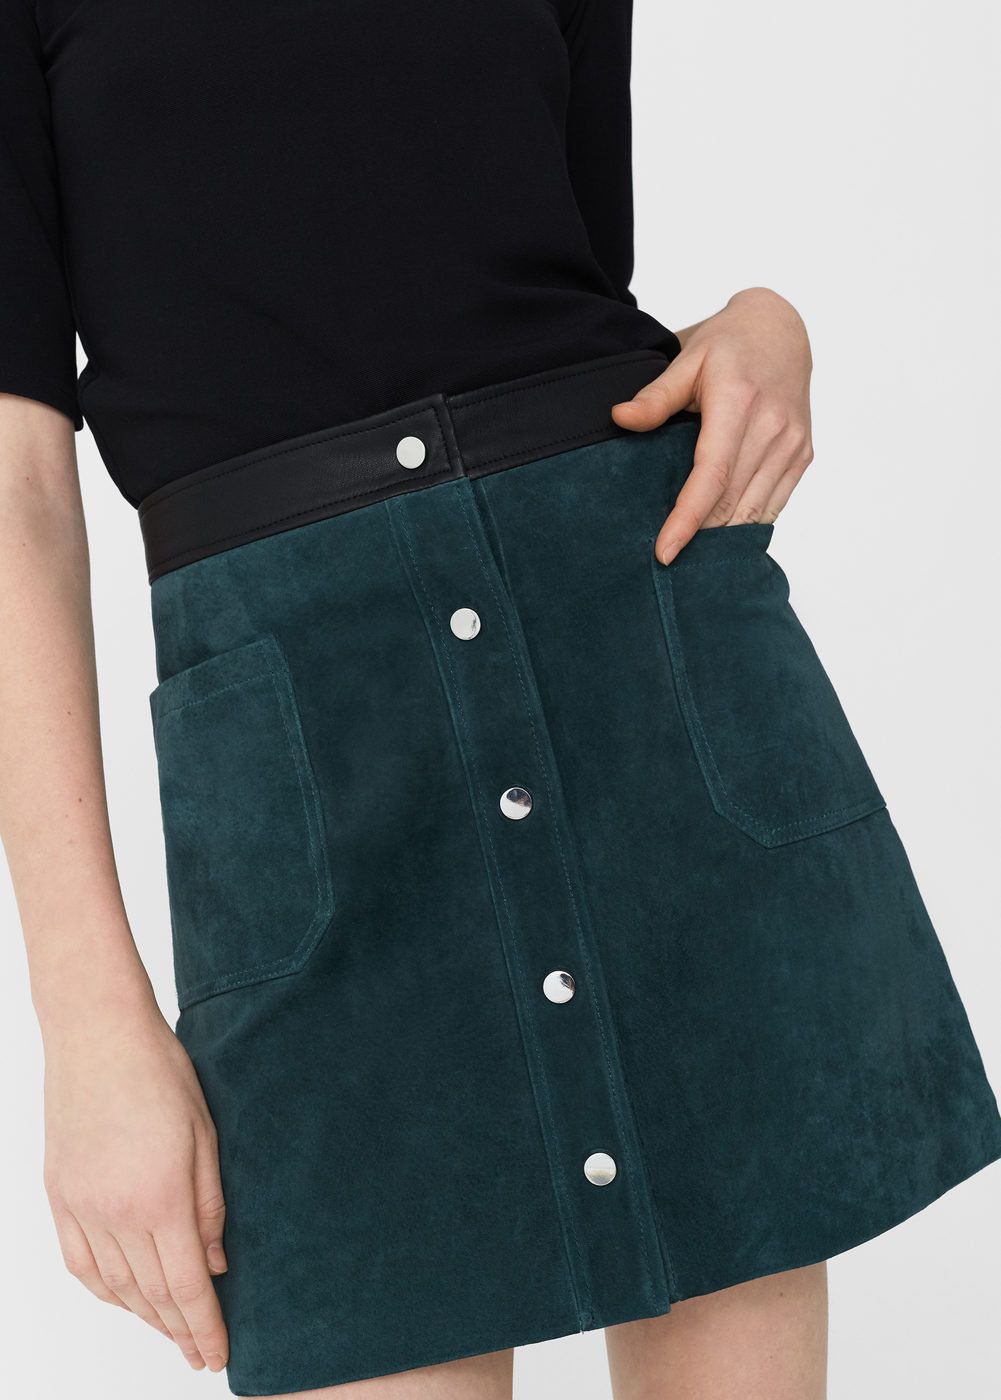 A close up of a model wearing a green suede skirt with buttons down the front